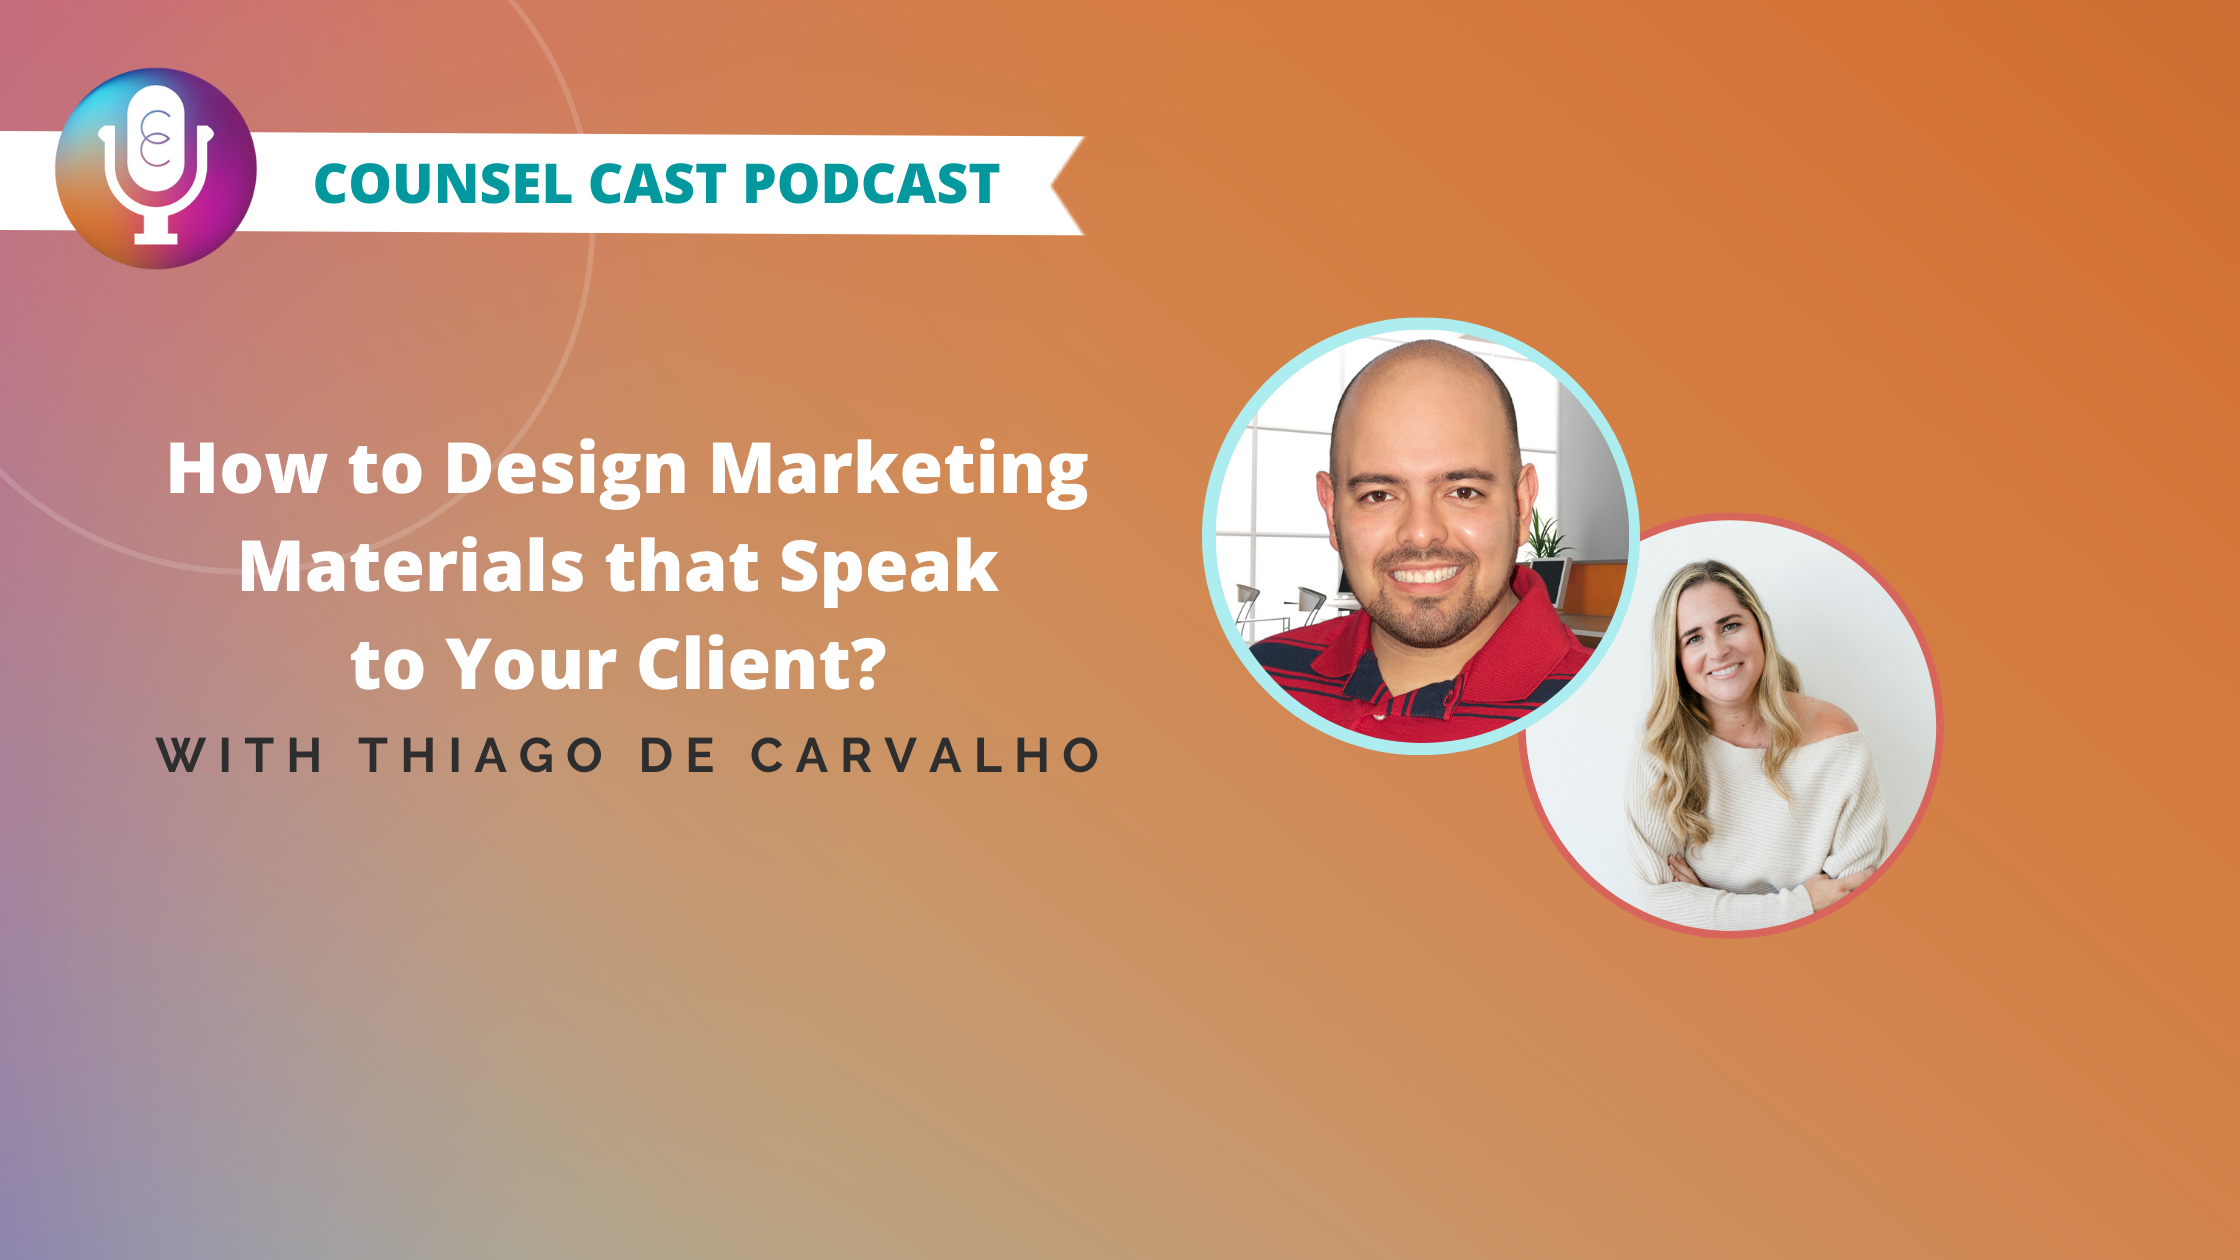 How to Design Marketing Materials that Speak to Your Client? with Thiago de Carvalho